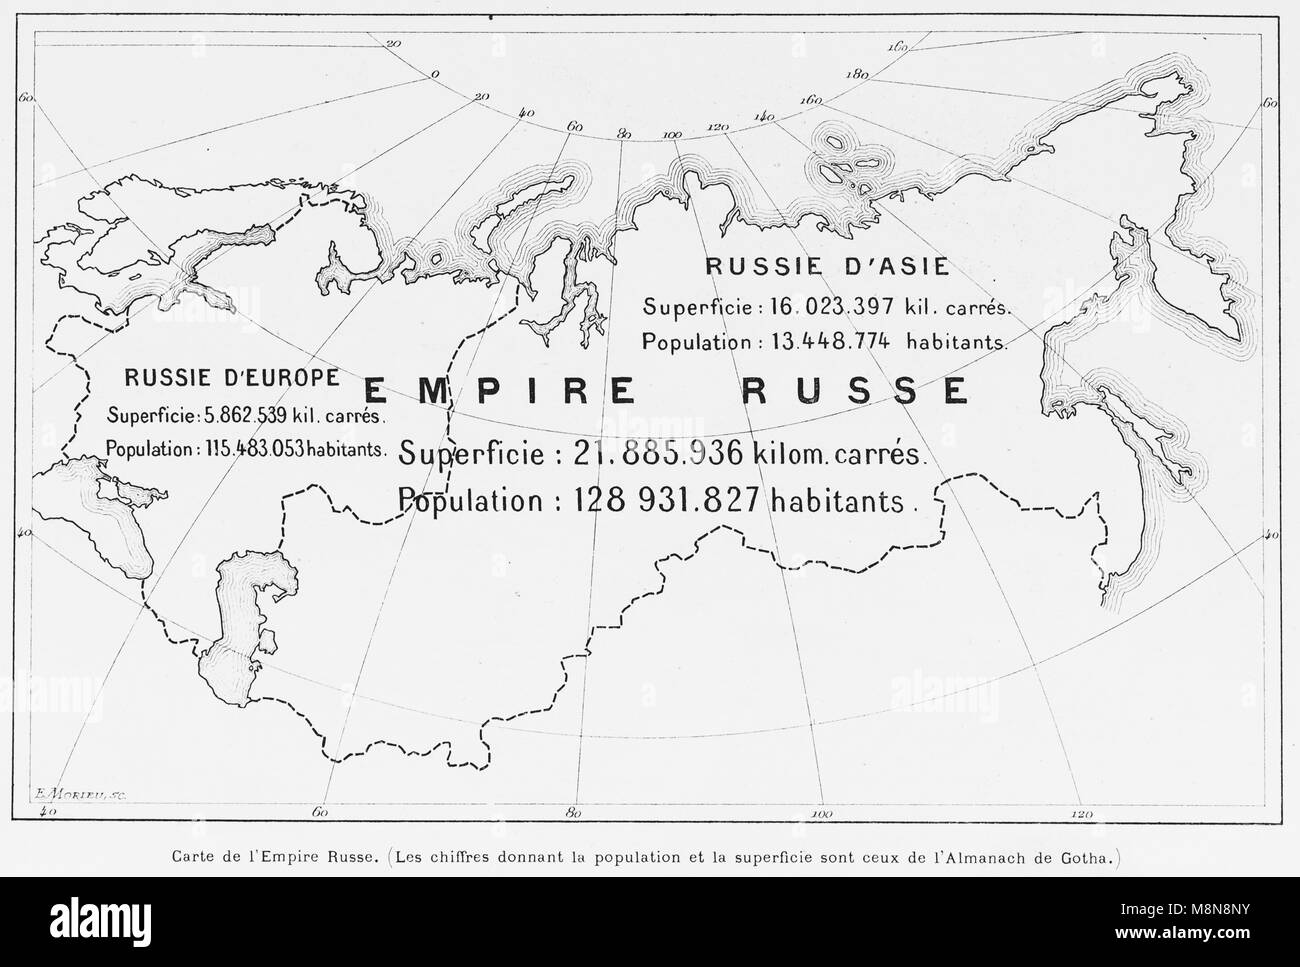 Map of the Russian Empire in 1900, Picture from the French weekly newspaper l'Illustration, 27th October 1900 Stock Photo